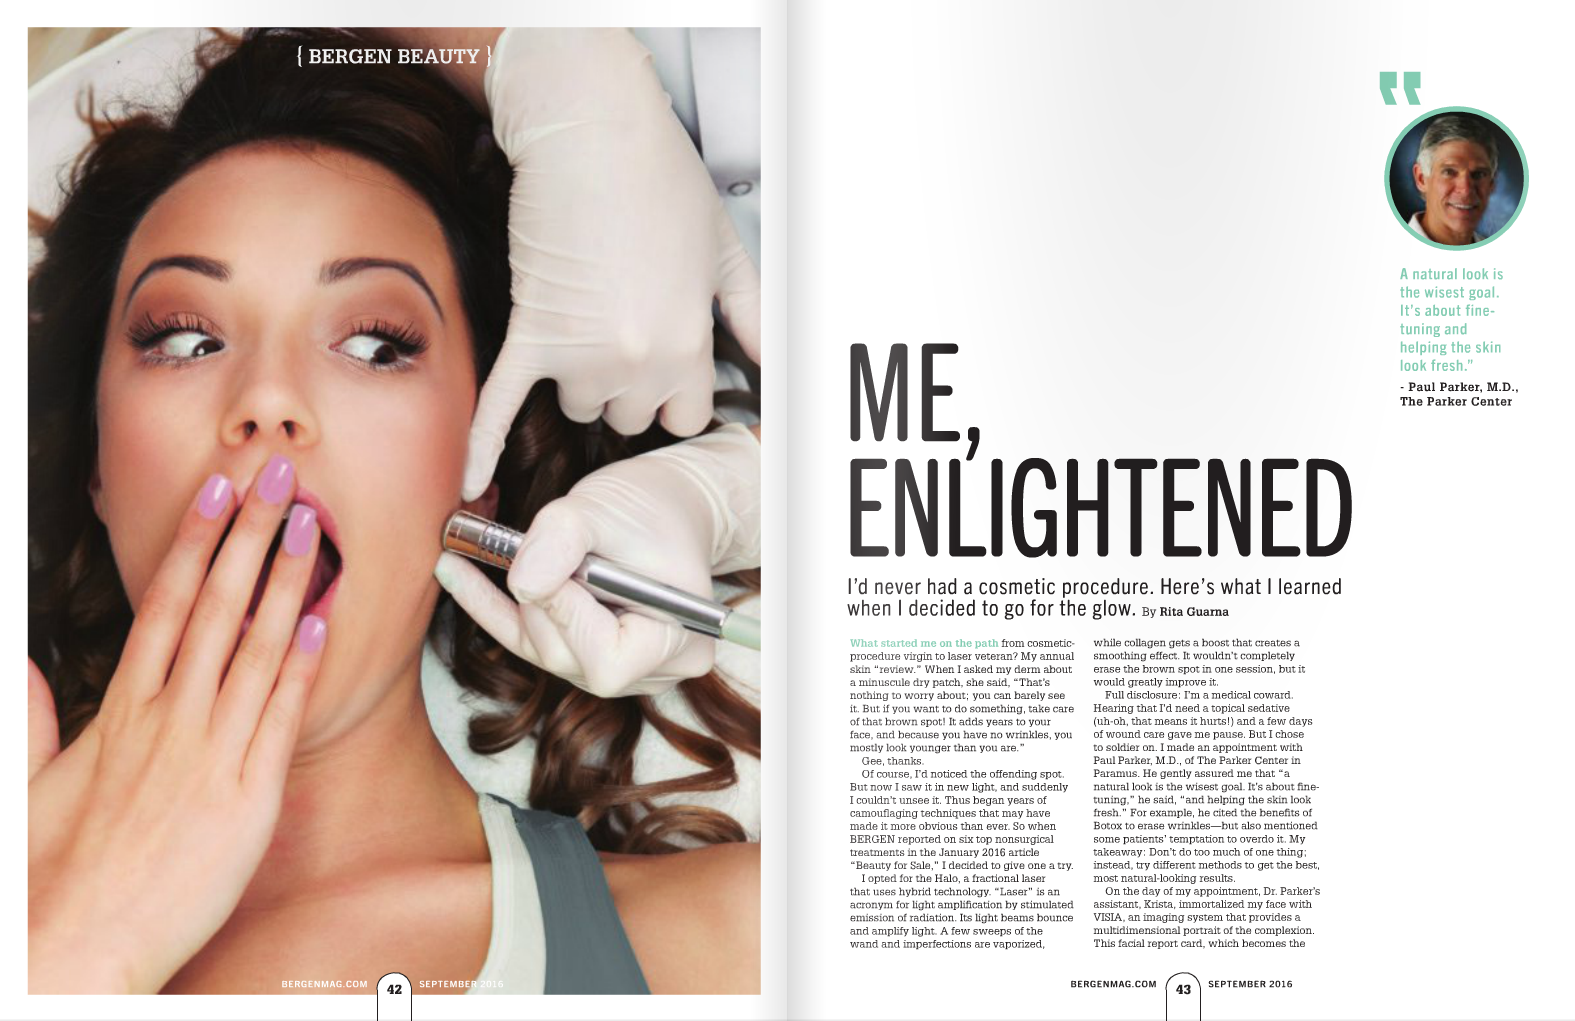 Me, Enlightened magazine article highlighted by Dr. Parker's face